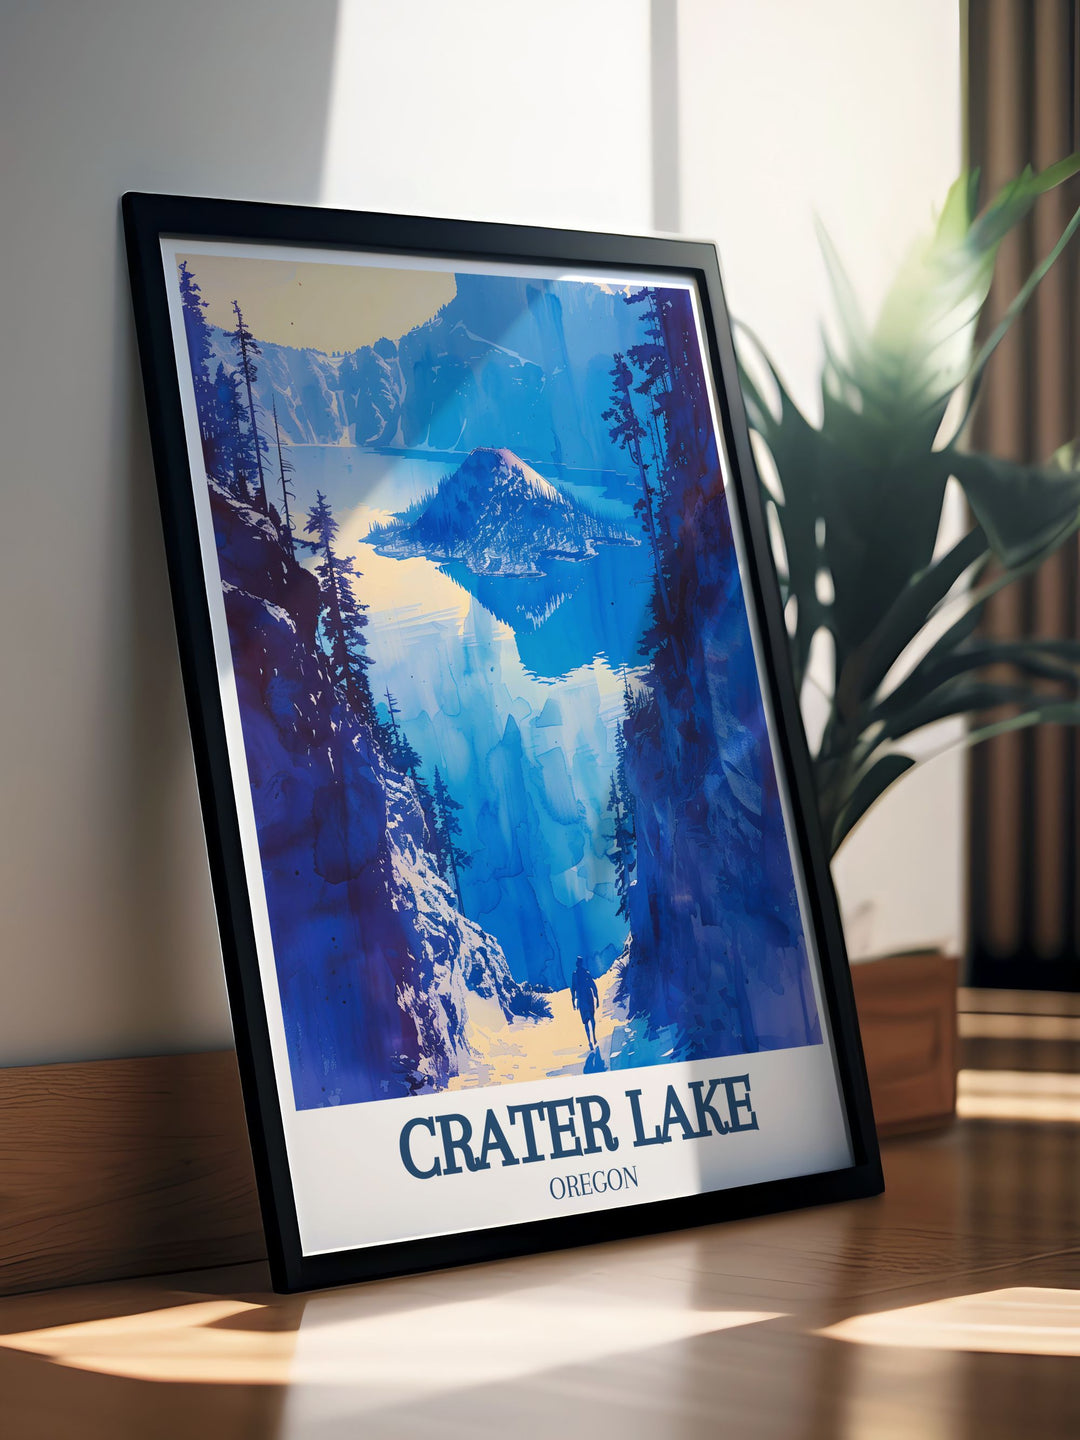 The majestic scenery of Crater Lake and the iconic beauty of Mount Scott are featured in this vibrant national park poster, perfect for adding Oregons unique charm and elegance to your home.